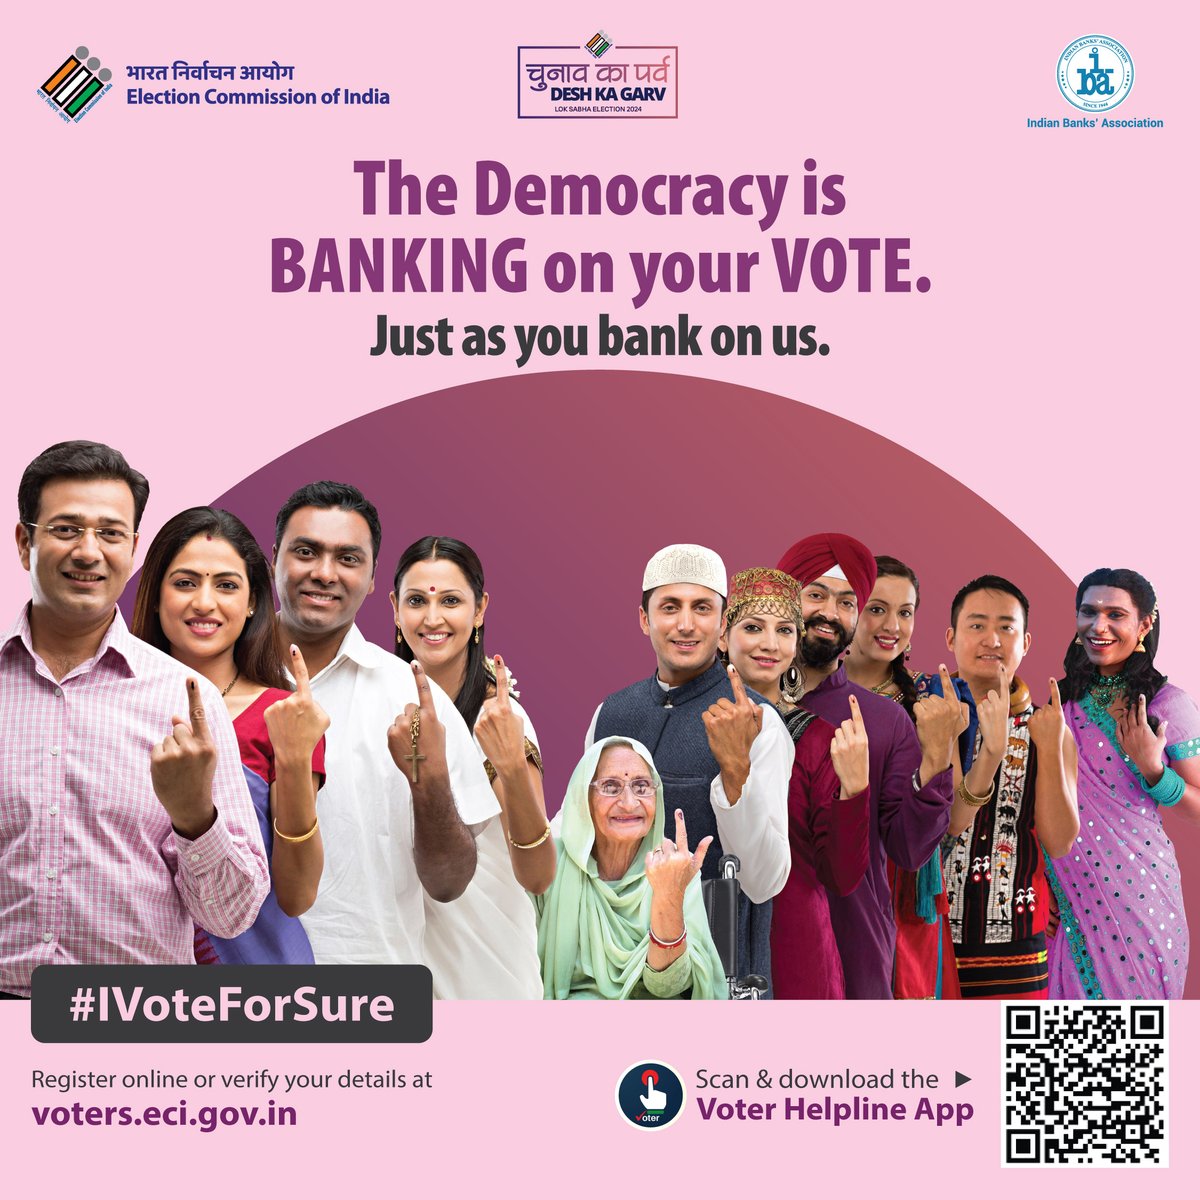 Cast your vote to shape a better future for our nation. Your vote counts!

@ECISVEEP  @DFS_India 

#IVoteForSure #UnionBankOfIndia #goodpeopletobankwith